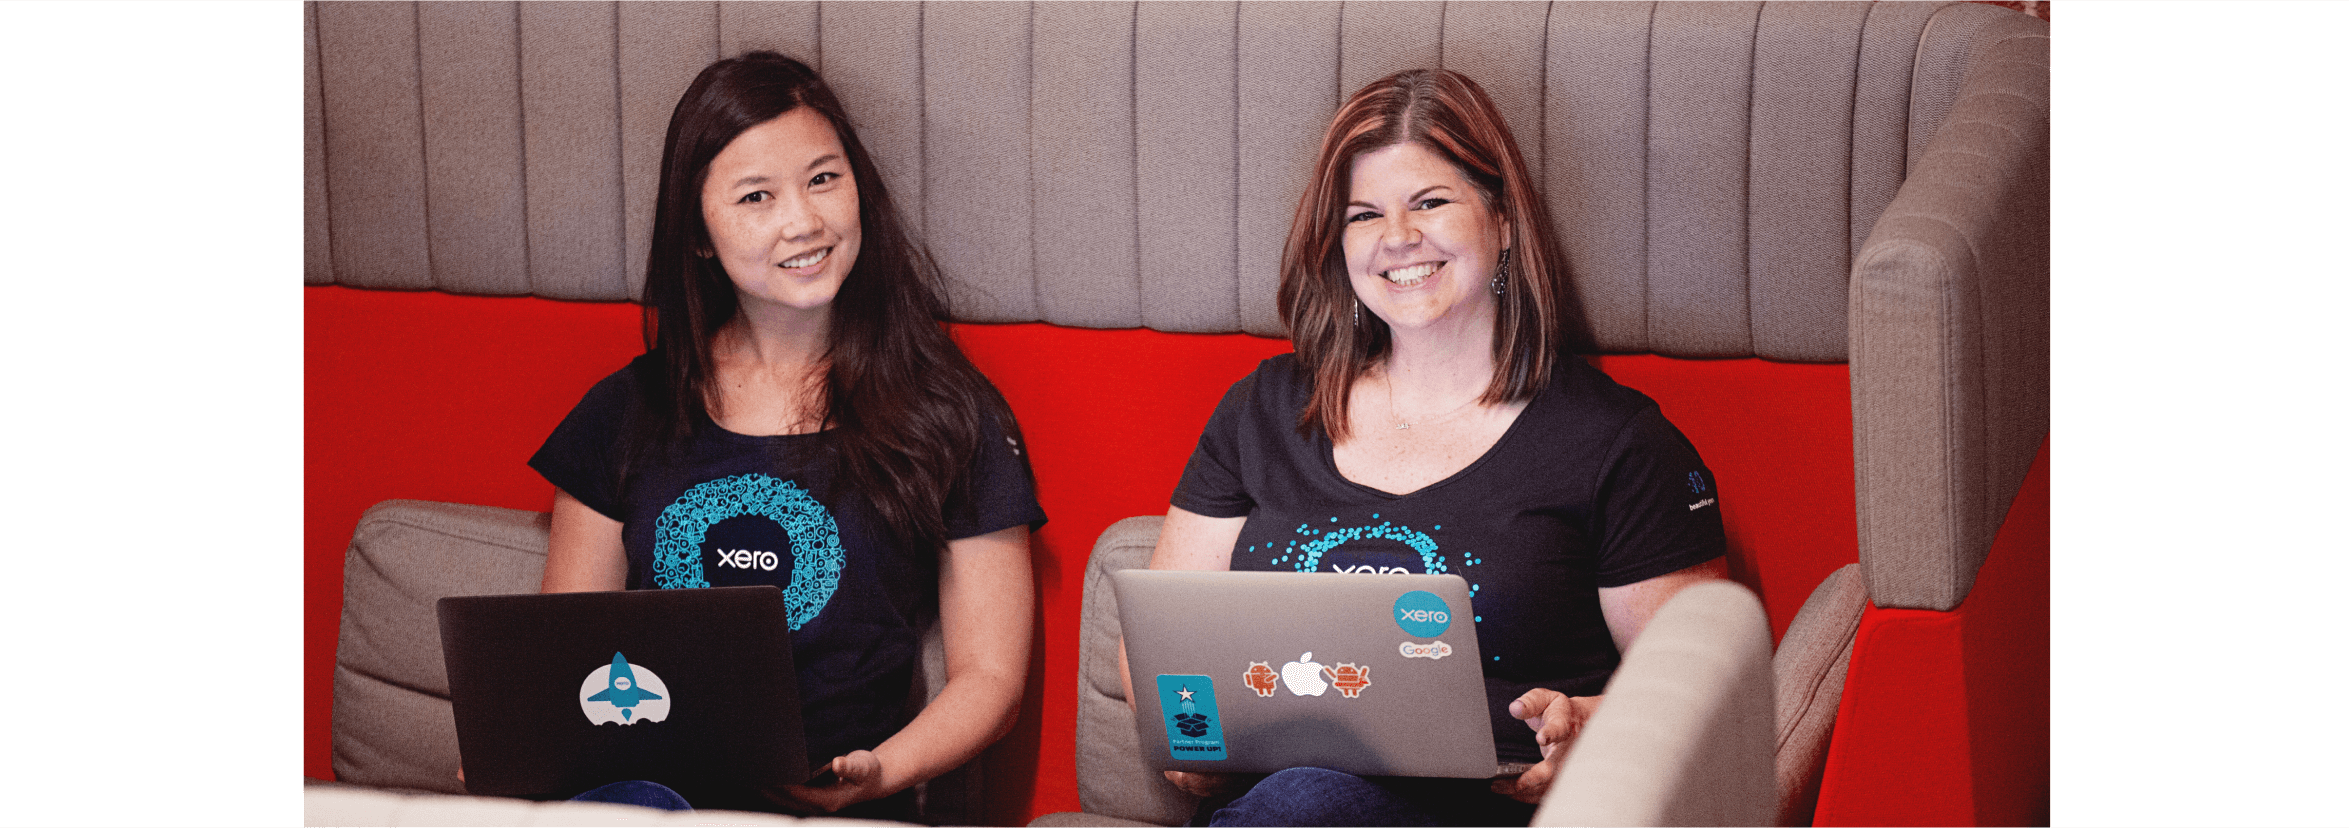 Two Xero team members smile while holding their laptops, happy with their career choices to join Xero.